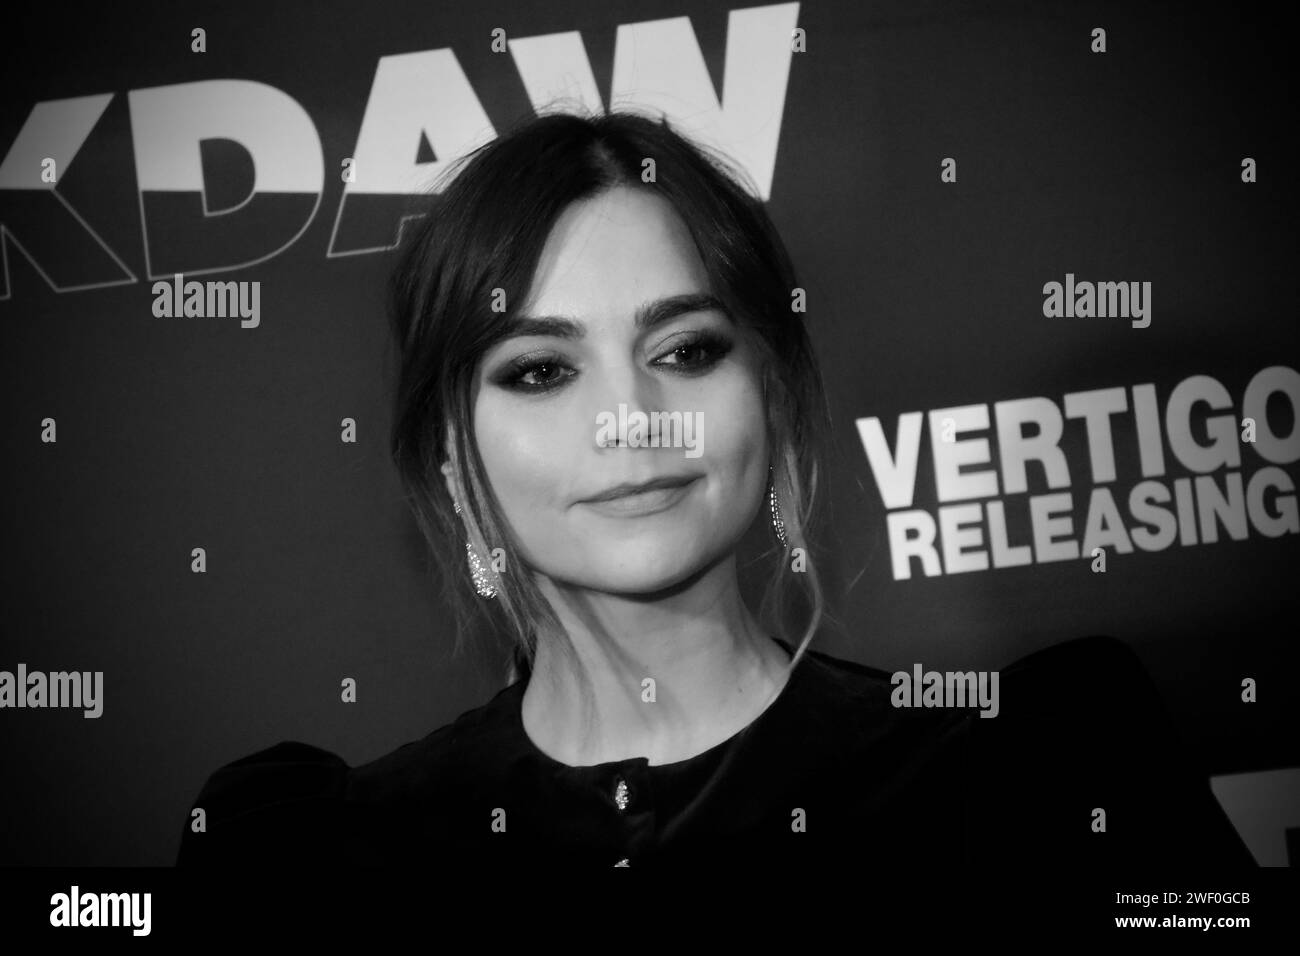 Actress Jenna Coleman pictured at the UK Premiere of 'Jackdaw'. Credit: James Hind/Alamy. Stock Photo